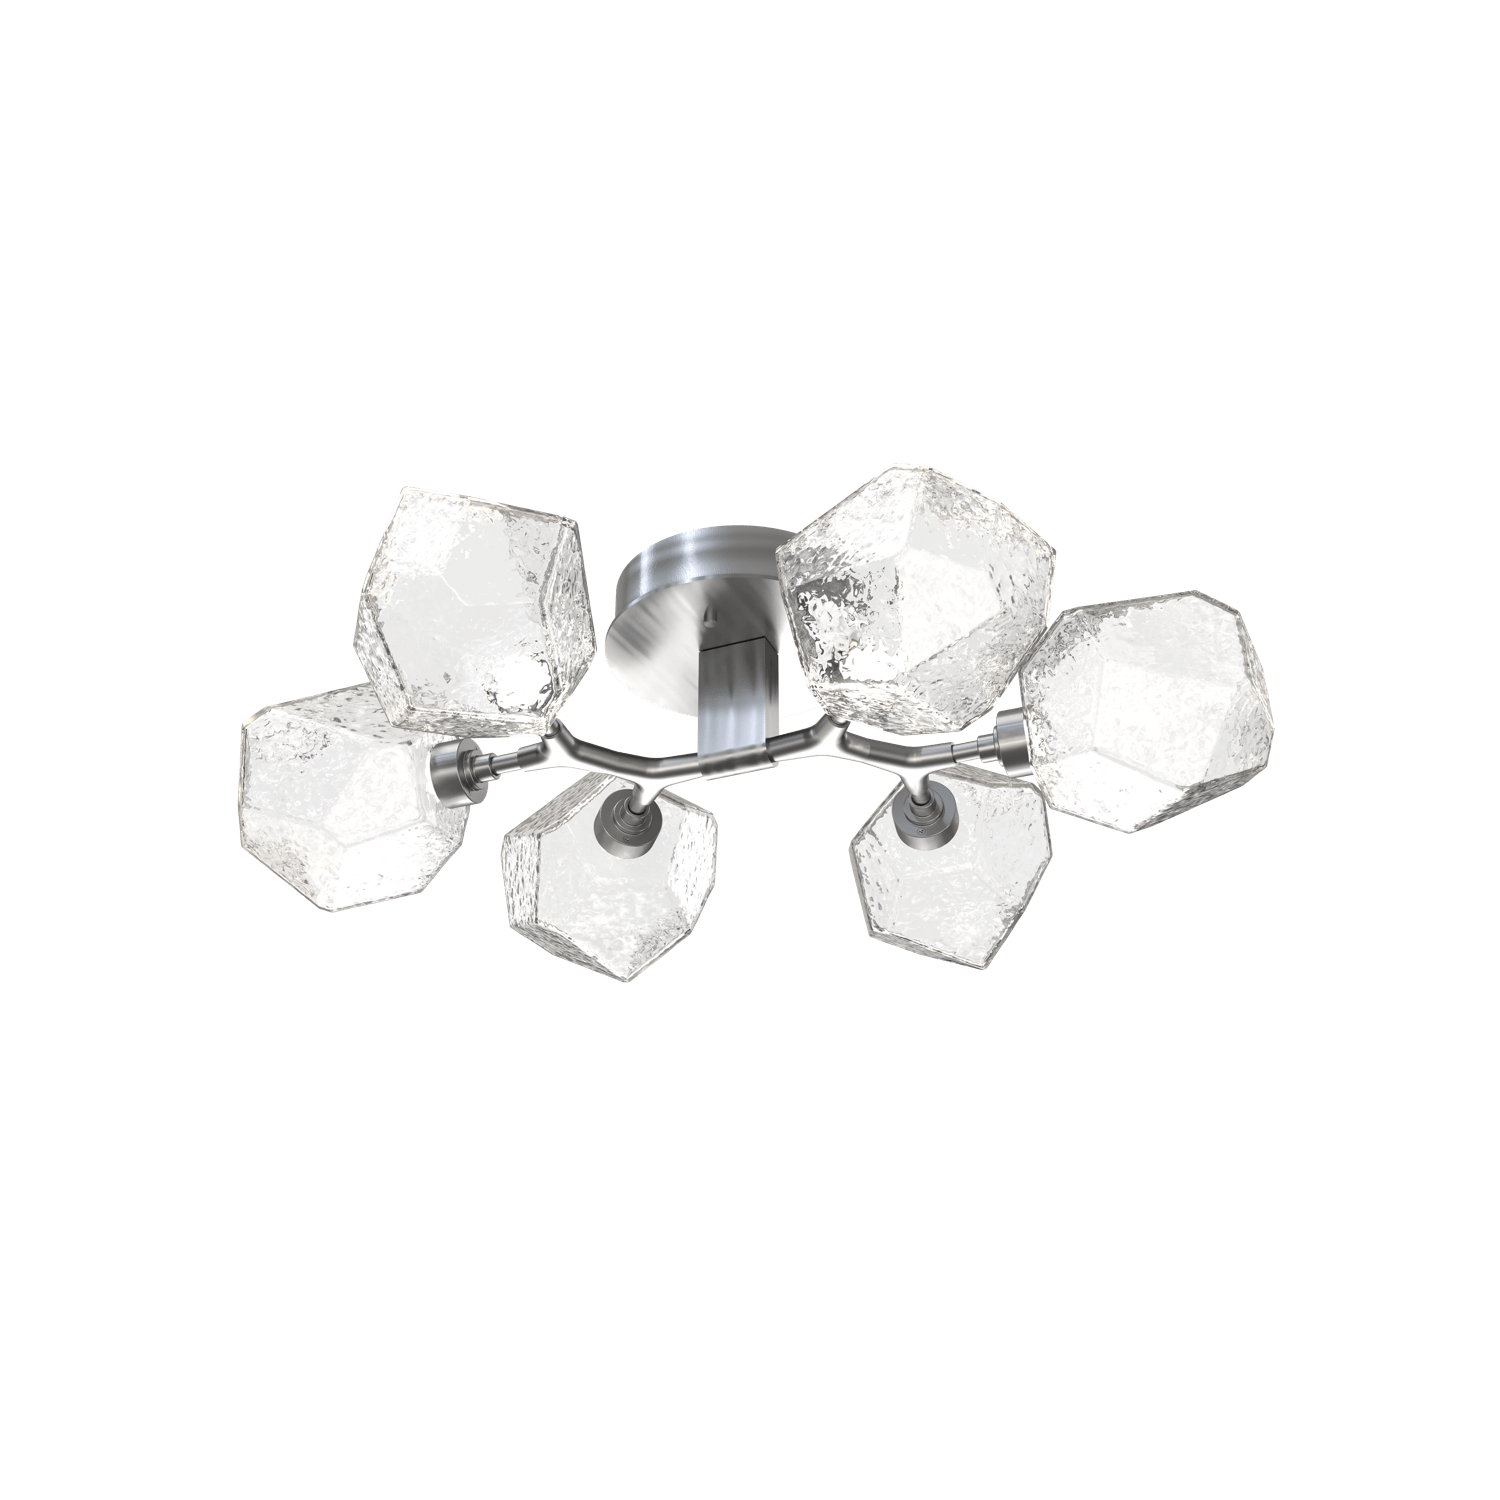 CLB0039-01-SN-C-Hammerton-Studio-Gem-6-light-organic-flush-mount-light-with-satin-nickel-finish-and-clear-blown-glass-shades-and-LED-lamping